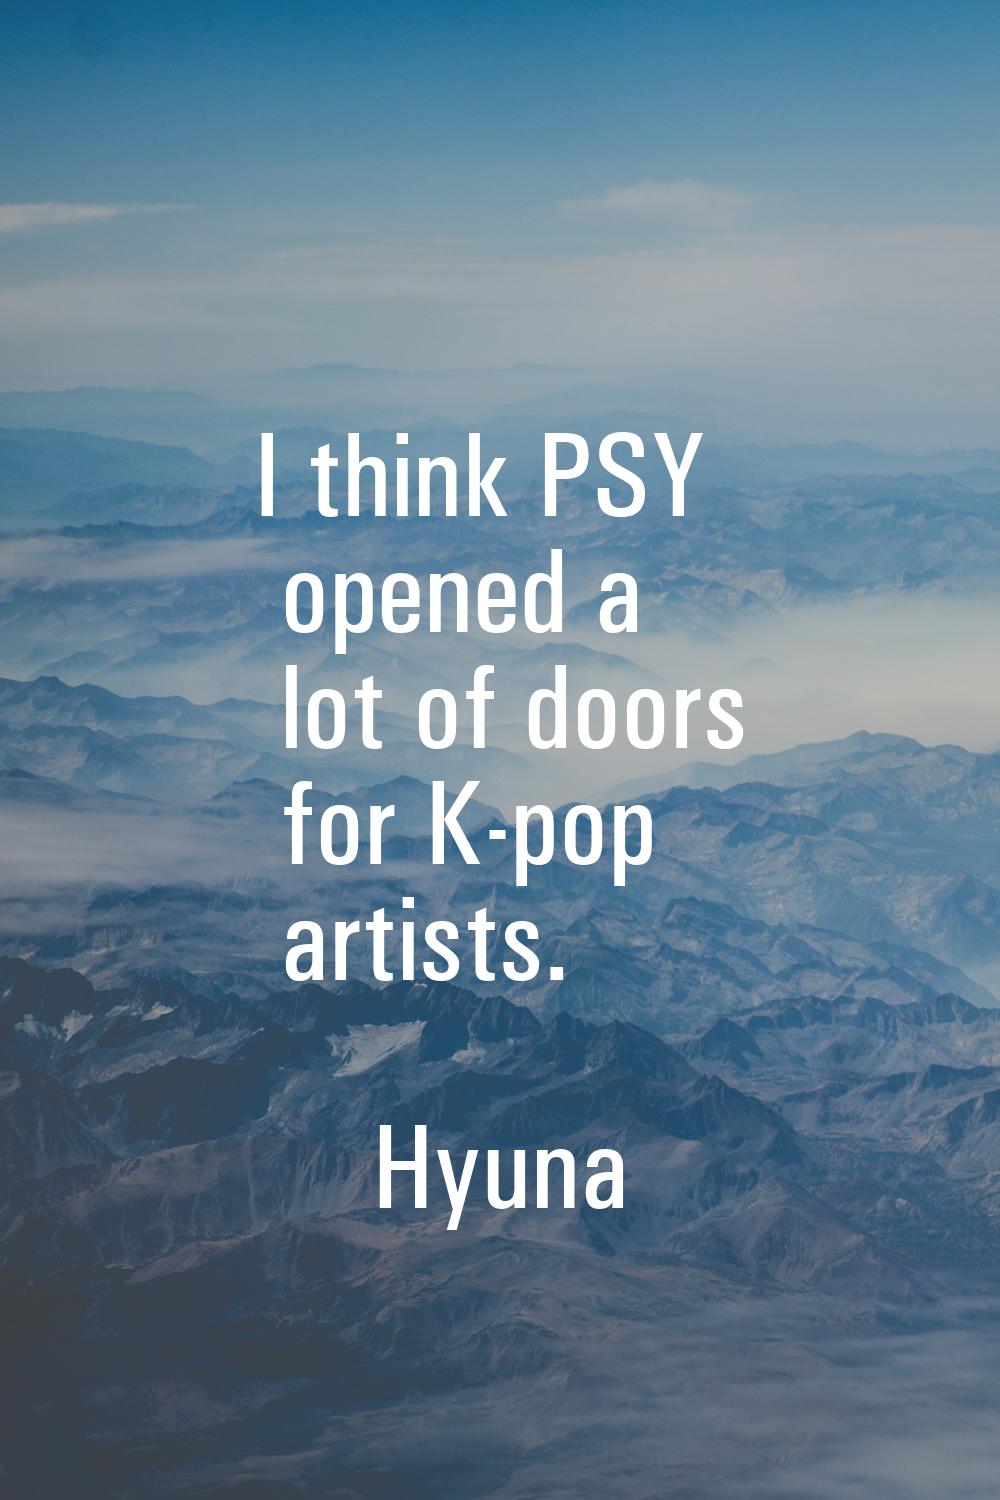 I think PSY opened a lot of doors for K-pop artists.